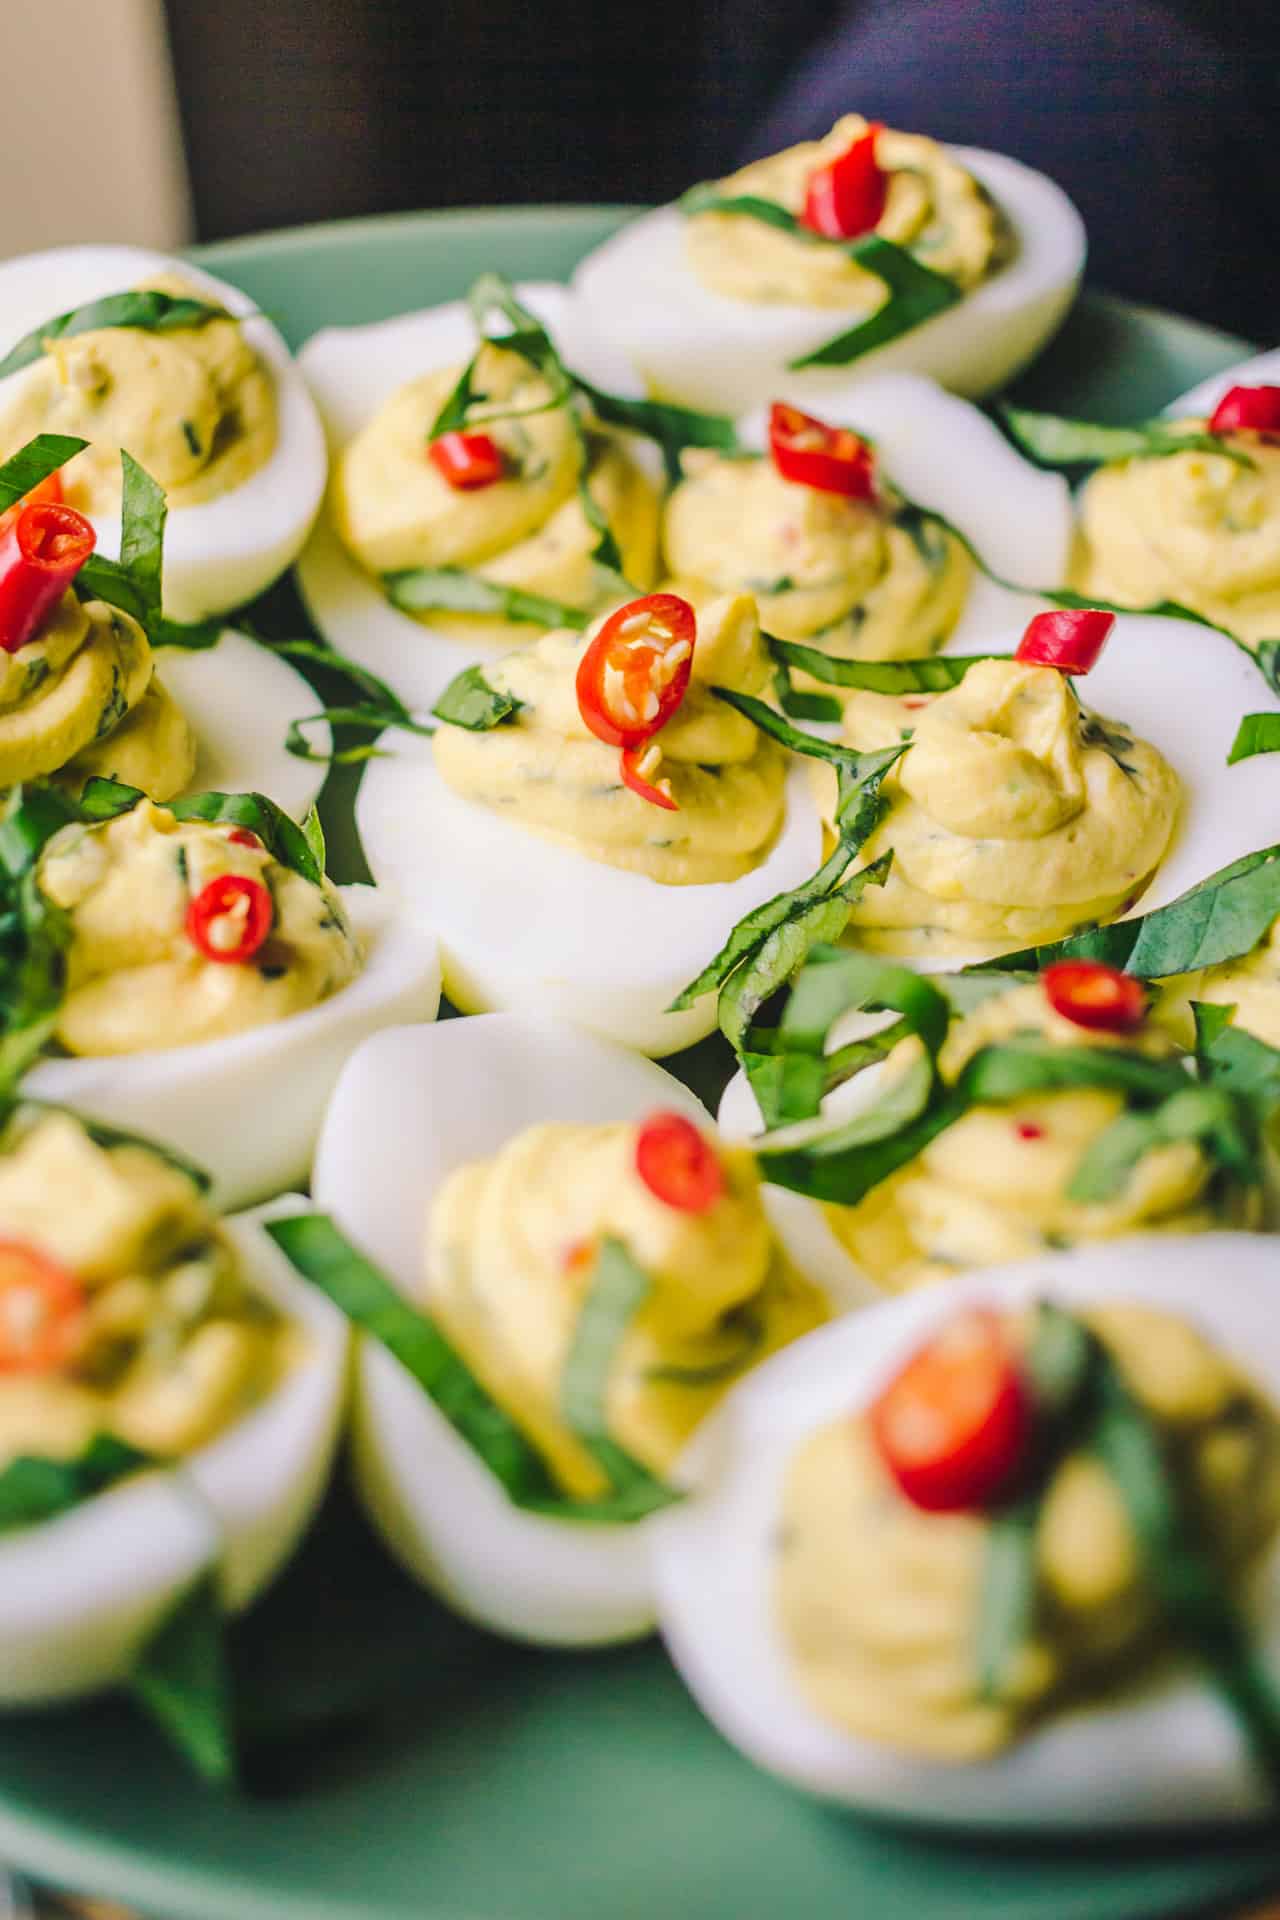 plate full of deviled eggs with red bird's eye chilis and thai basil